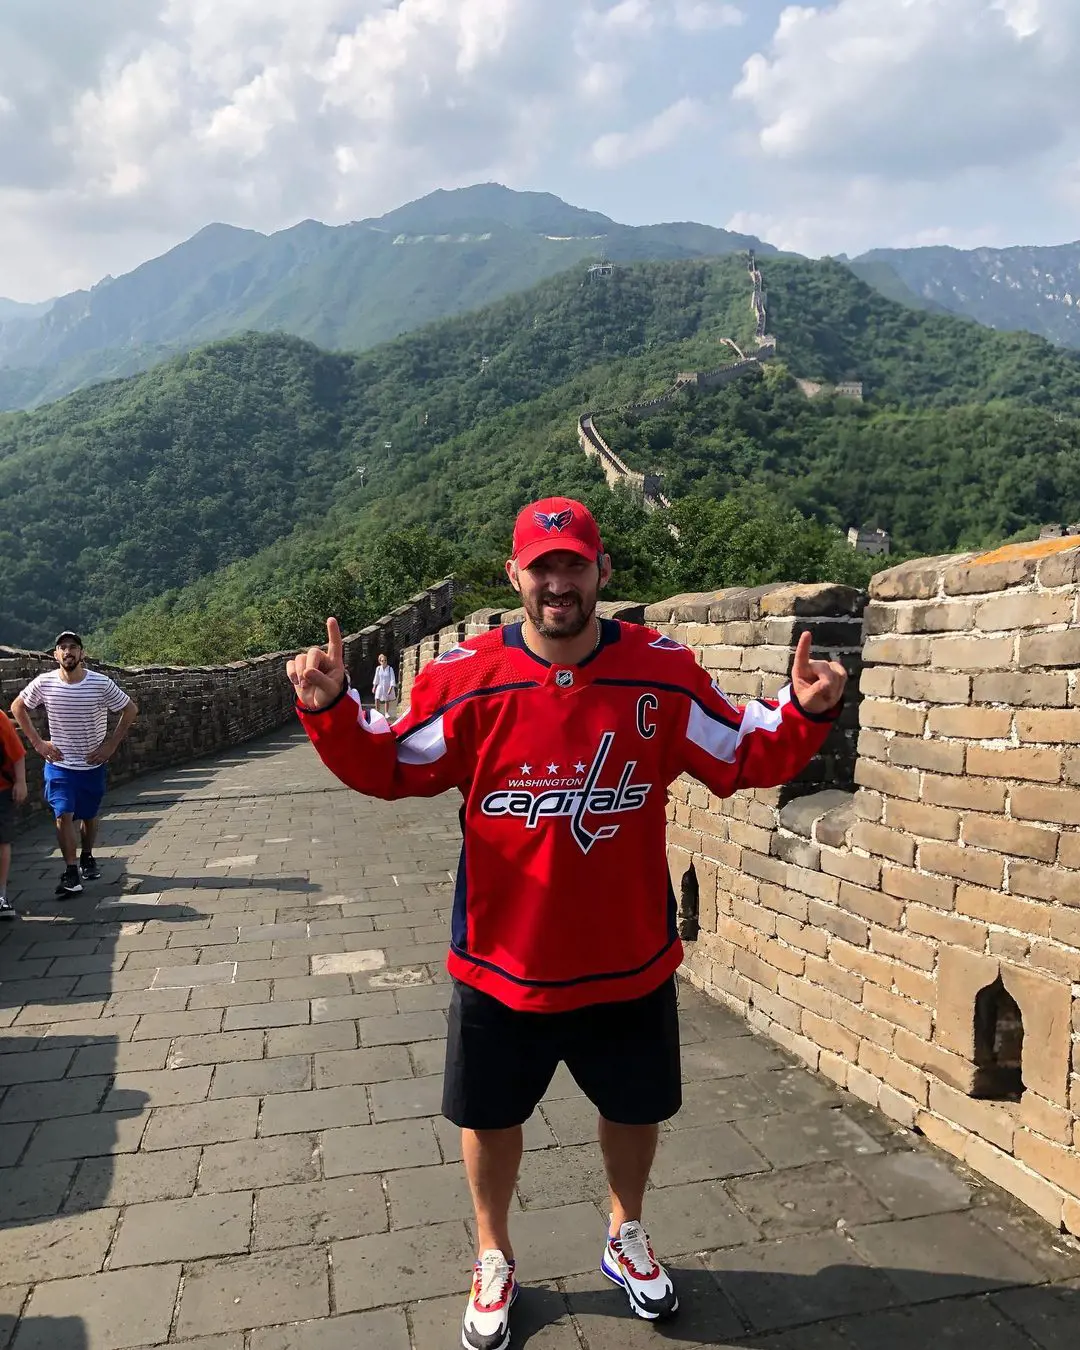 Alexander wearing The Capitals attire while exploring the Great Wall of China